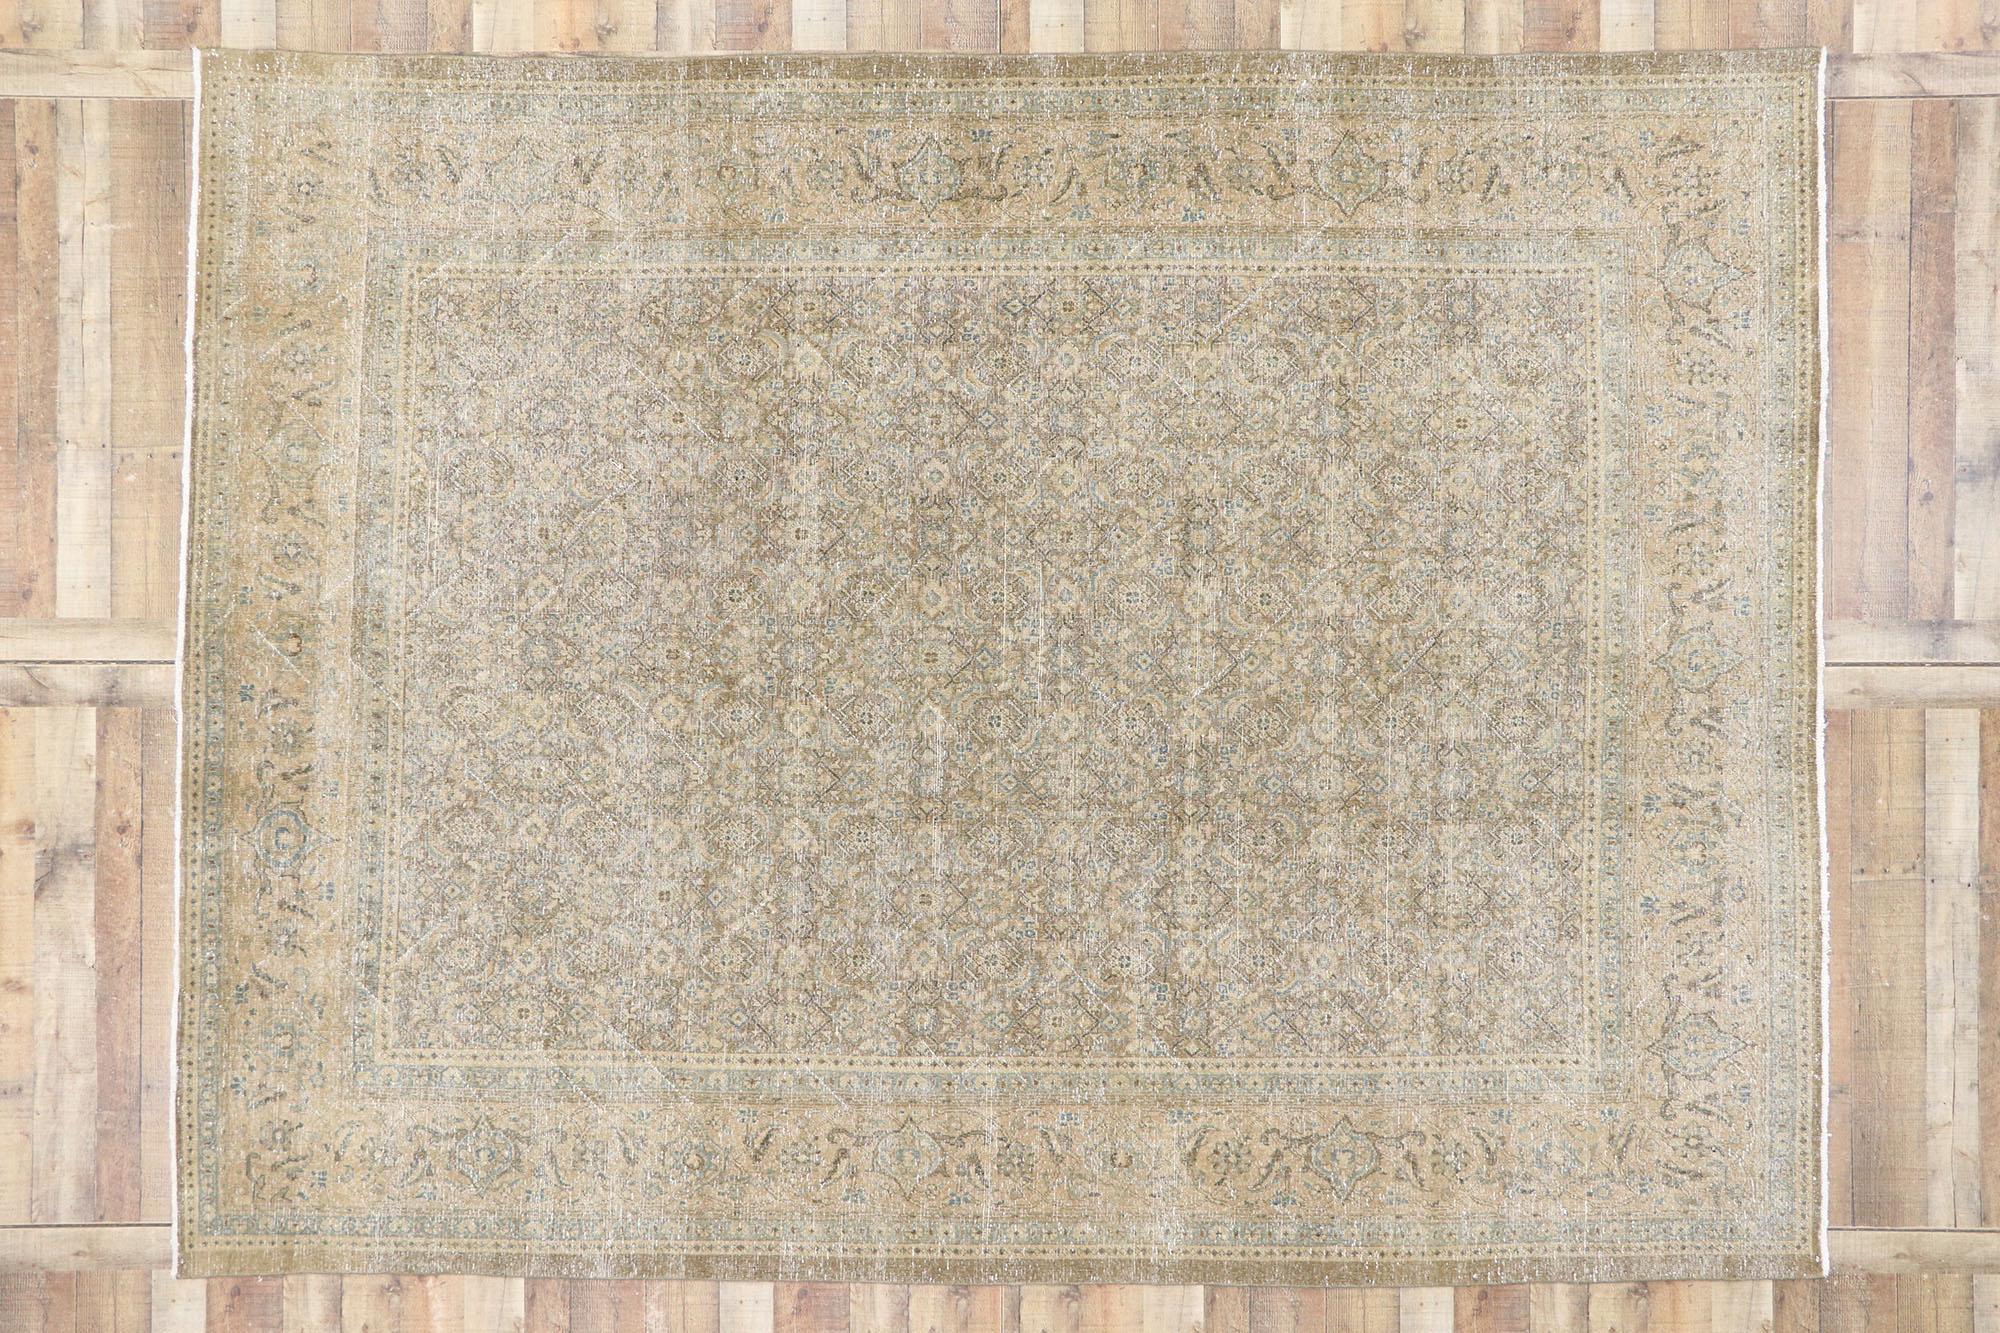 Distressed Antique Persian Mahal Rug with Modern Rustic Shaker Style 1